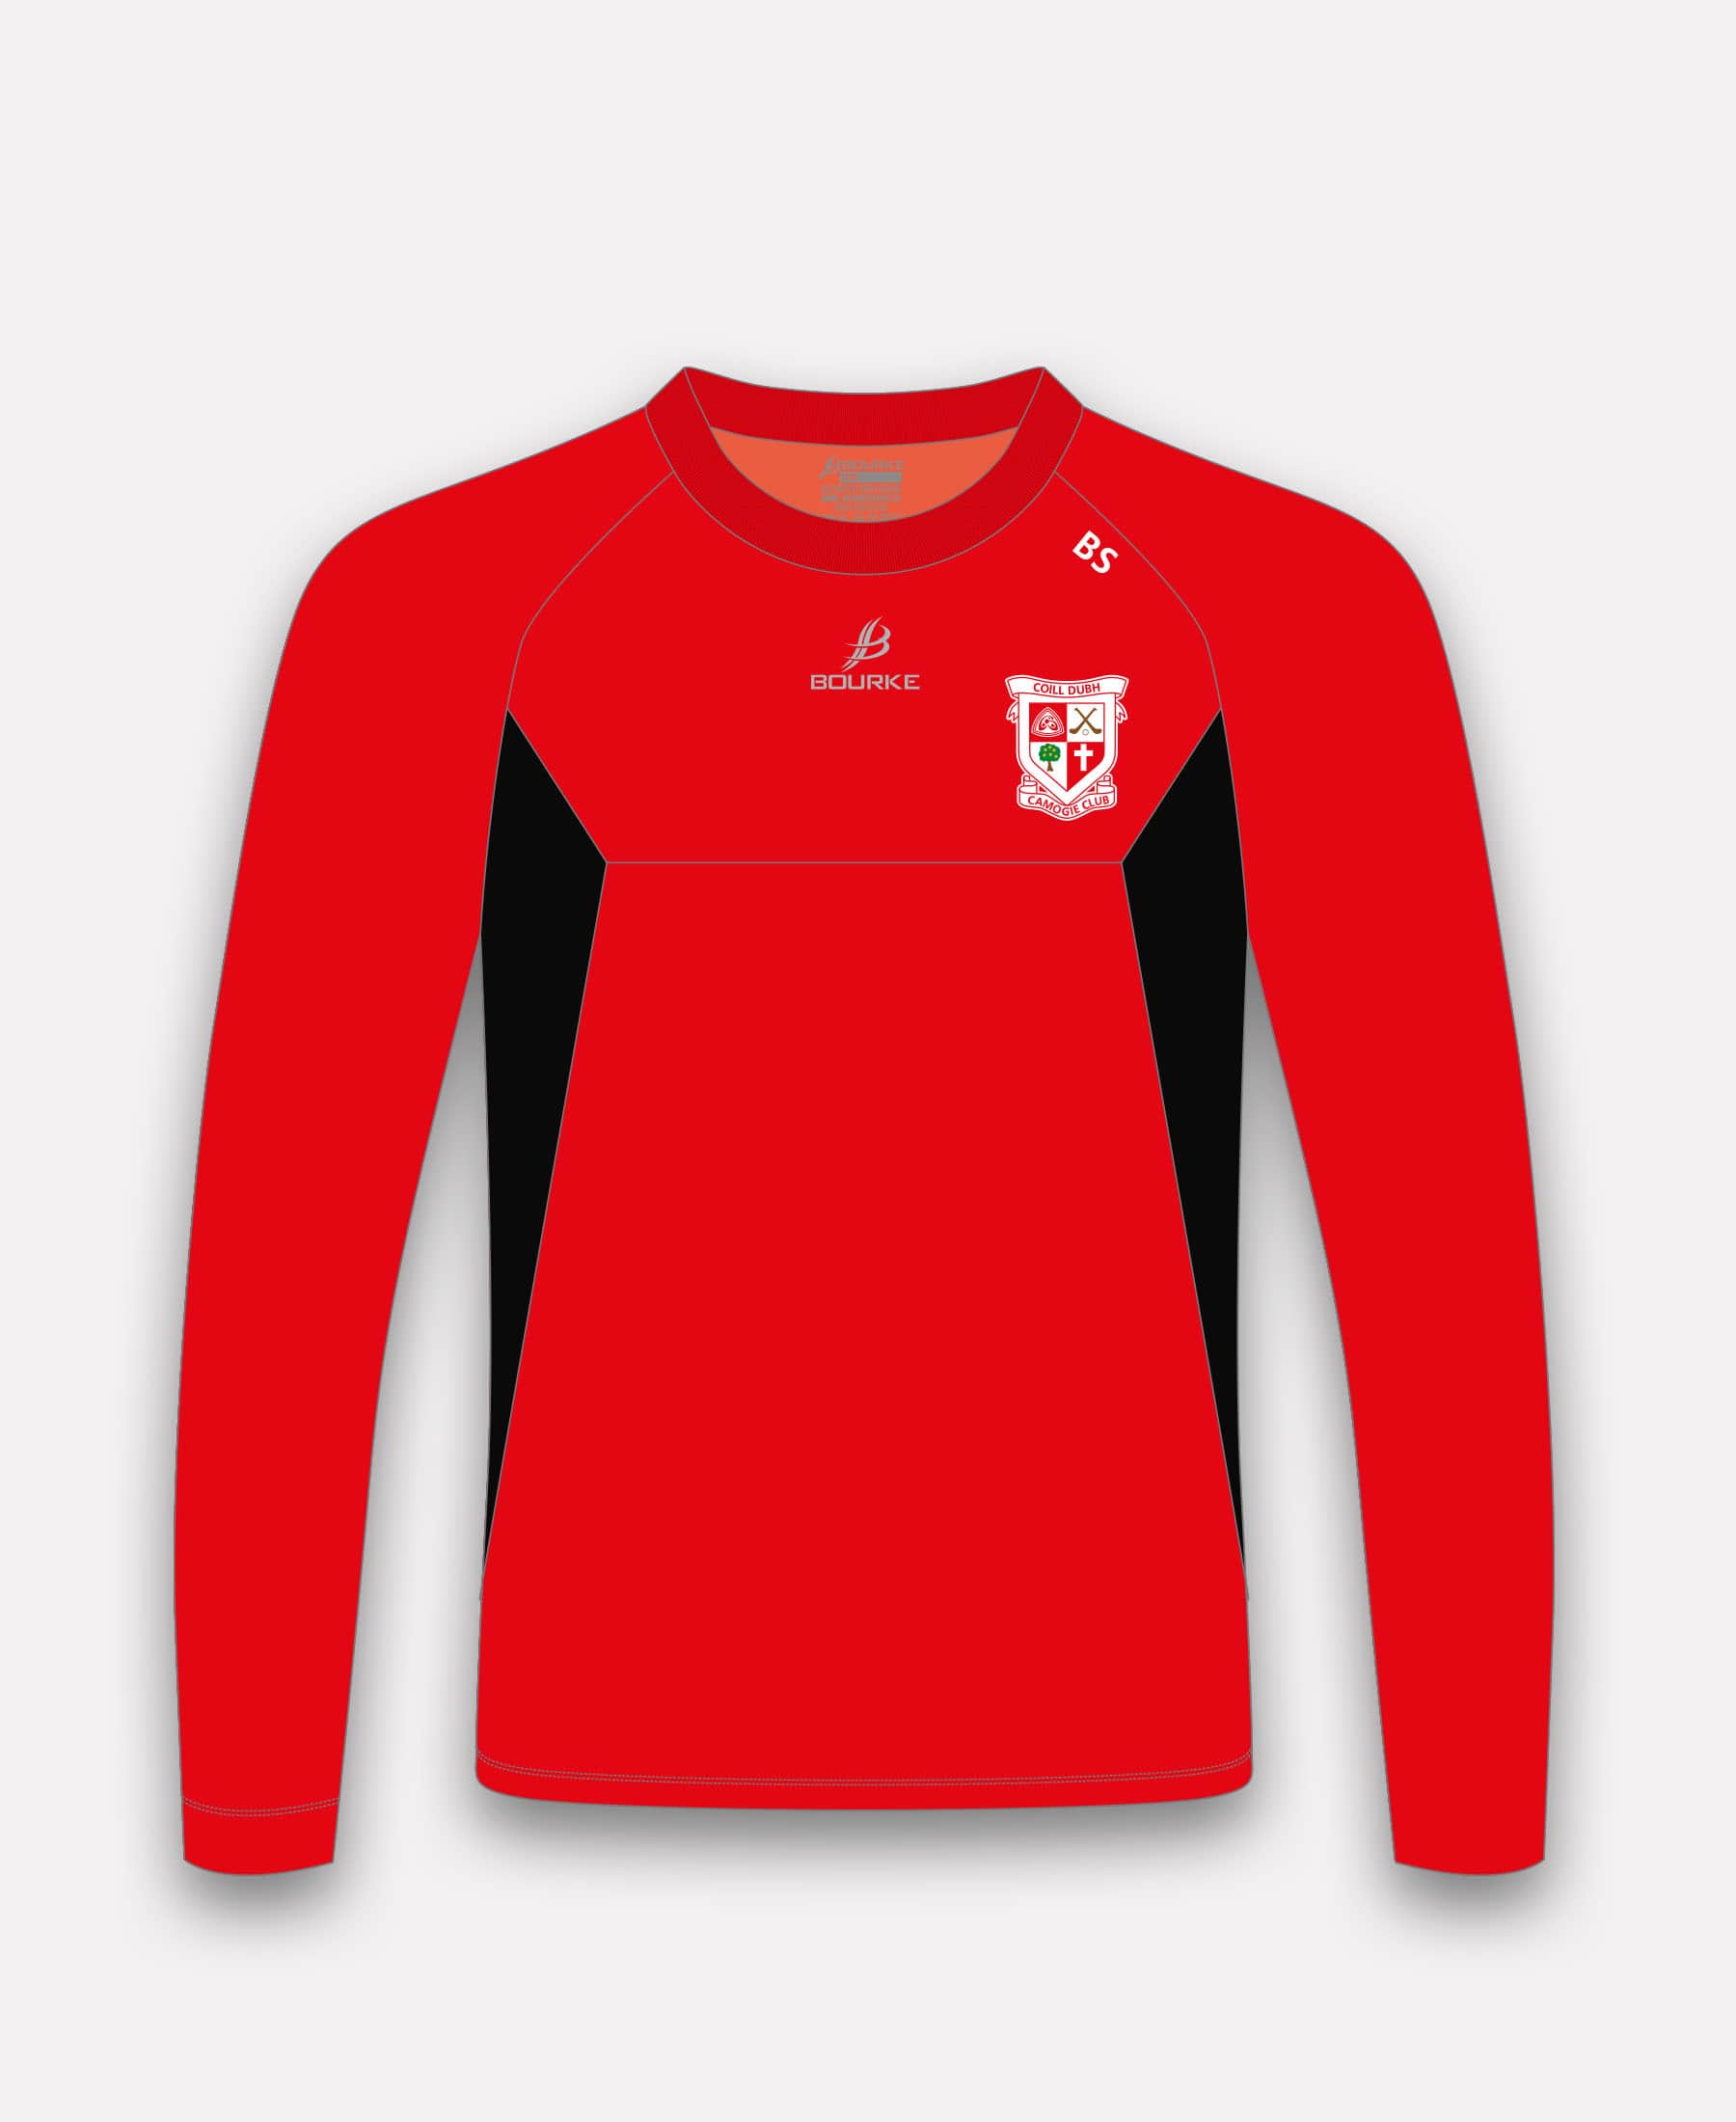 Coill Dubh Camogie BARR Crew Neck (Red/Black)